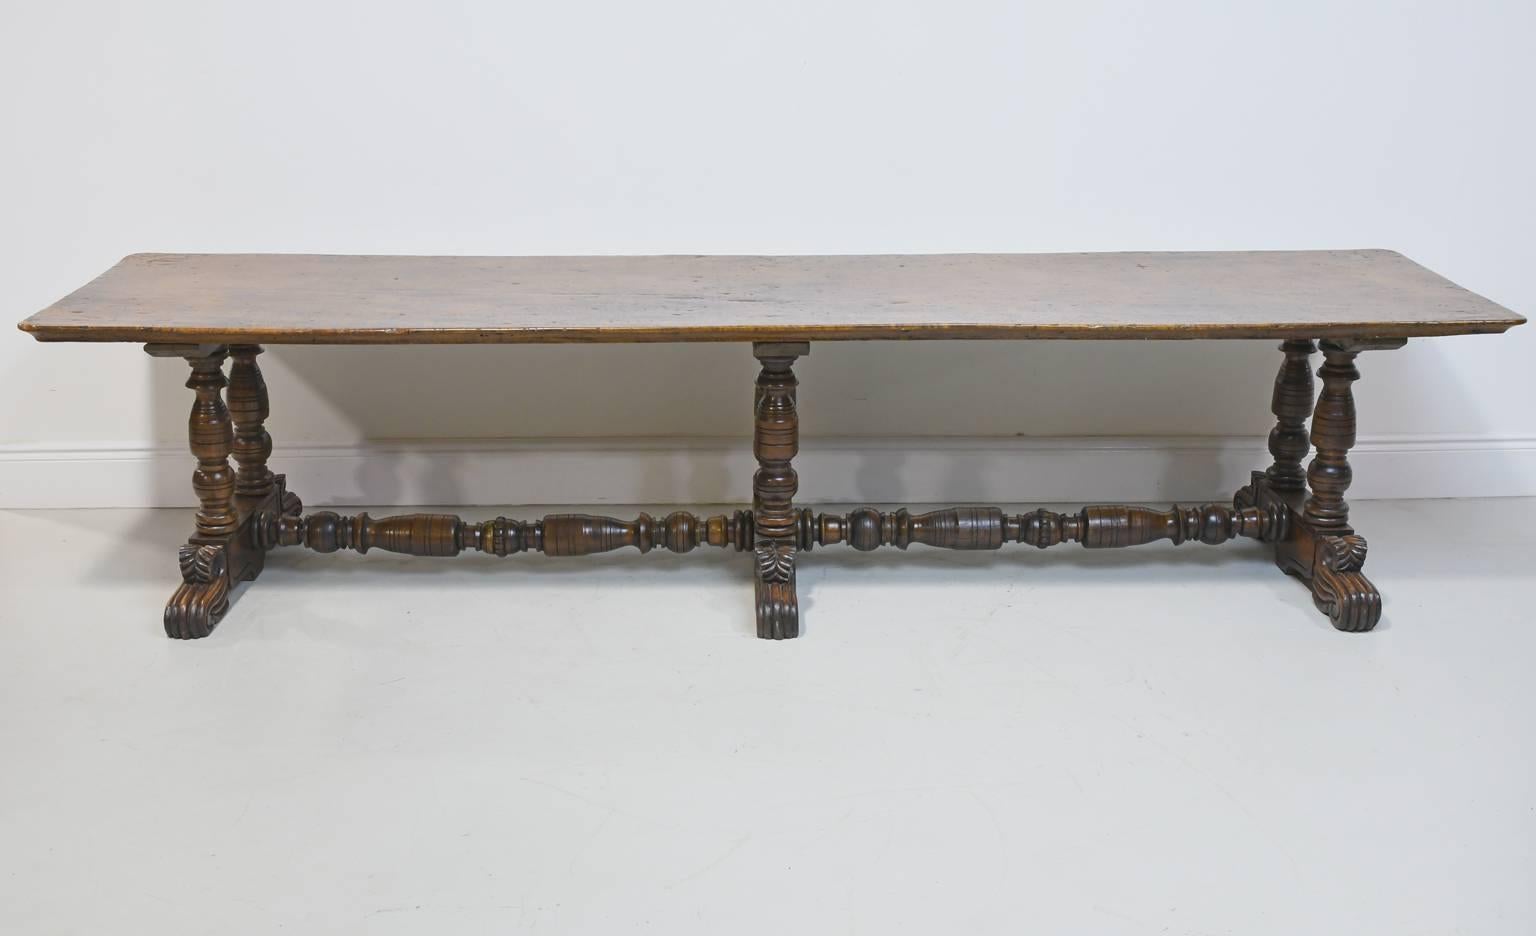 Made with a single plank of wood on the top, this extraordinary Spanish Colonial dining table is from the Philippines and features a beautifully turned and carved trestle base with stretcher, all made of Molave, an indigenous hardwood, circa early